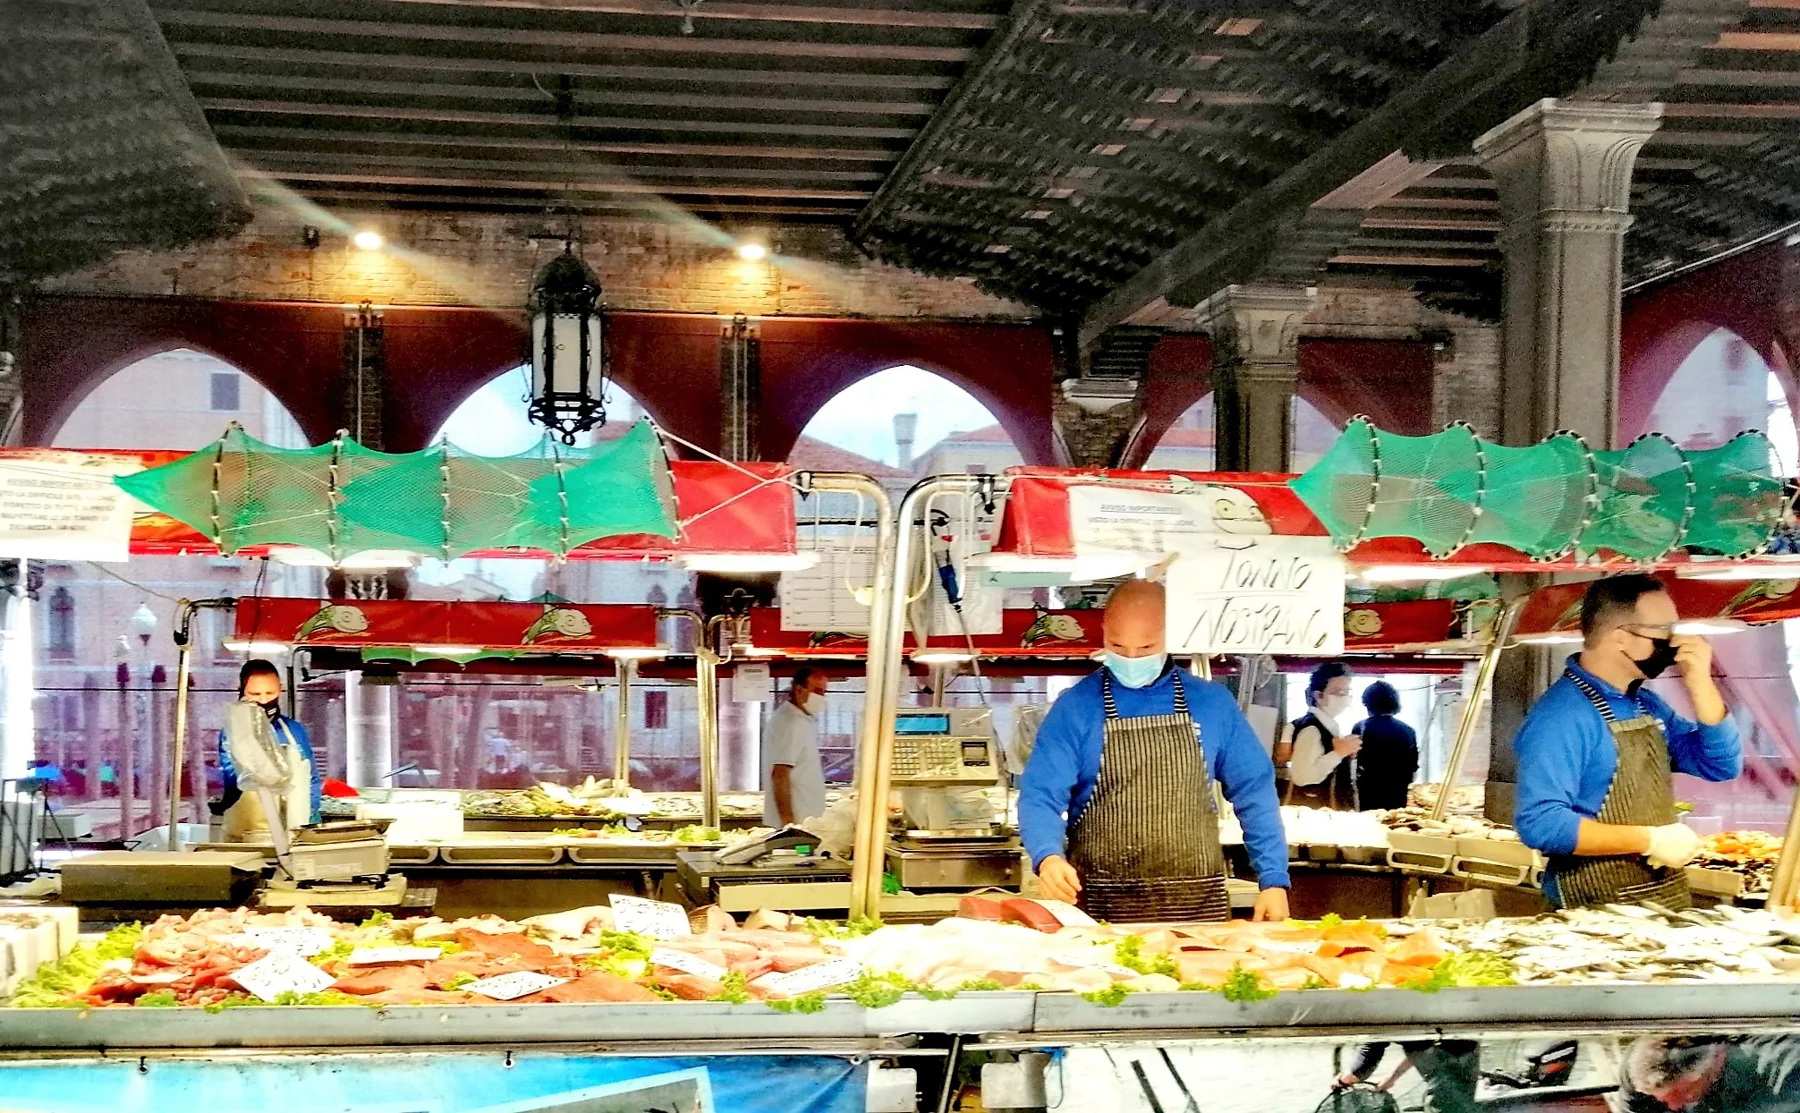 Fish shopping in Rialto, cooking & lunch in Murano - 1421030